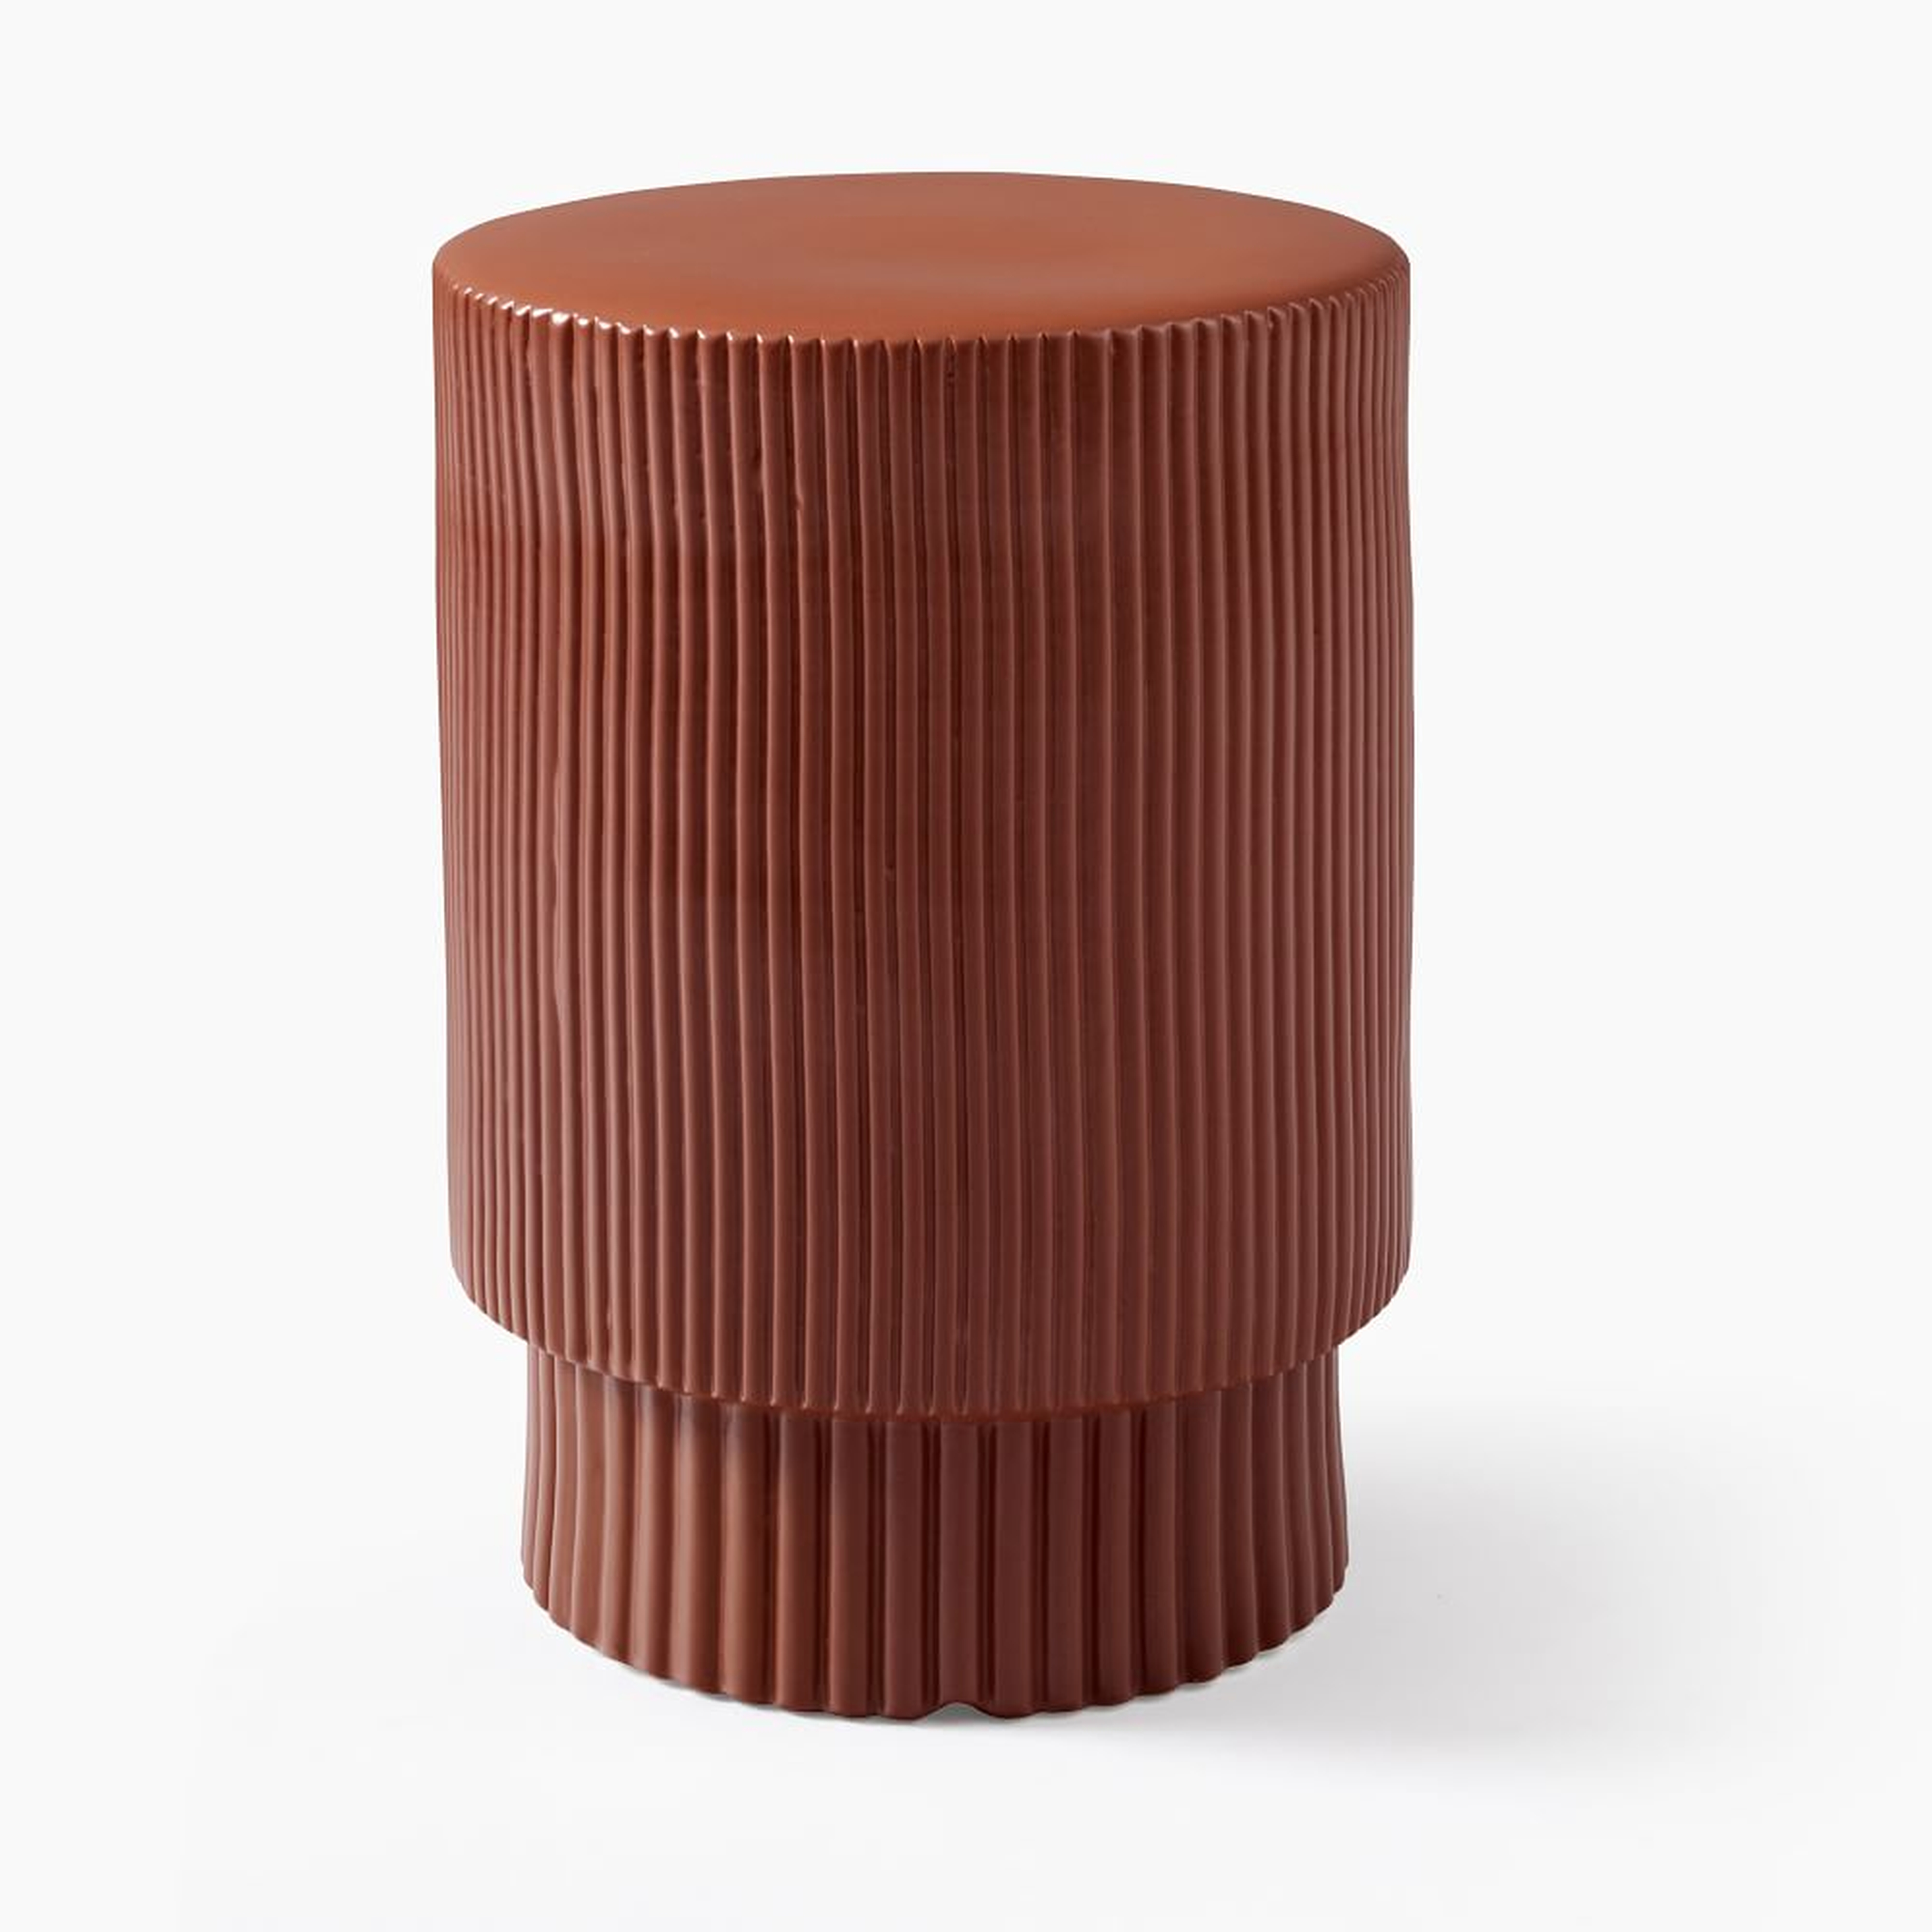 Textured (13") Collection Side Table, Terracotta - West Elm